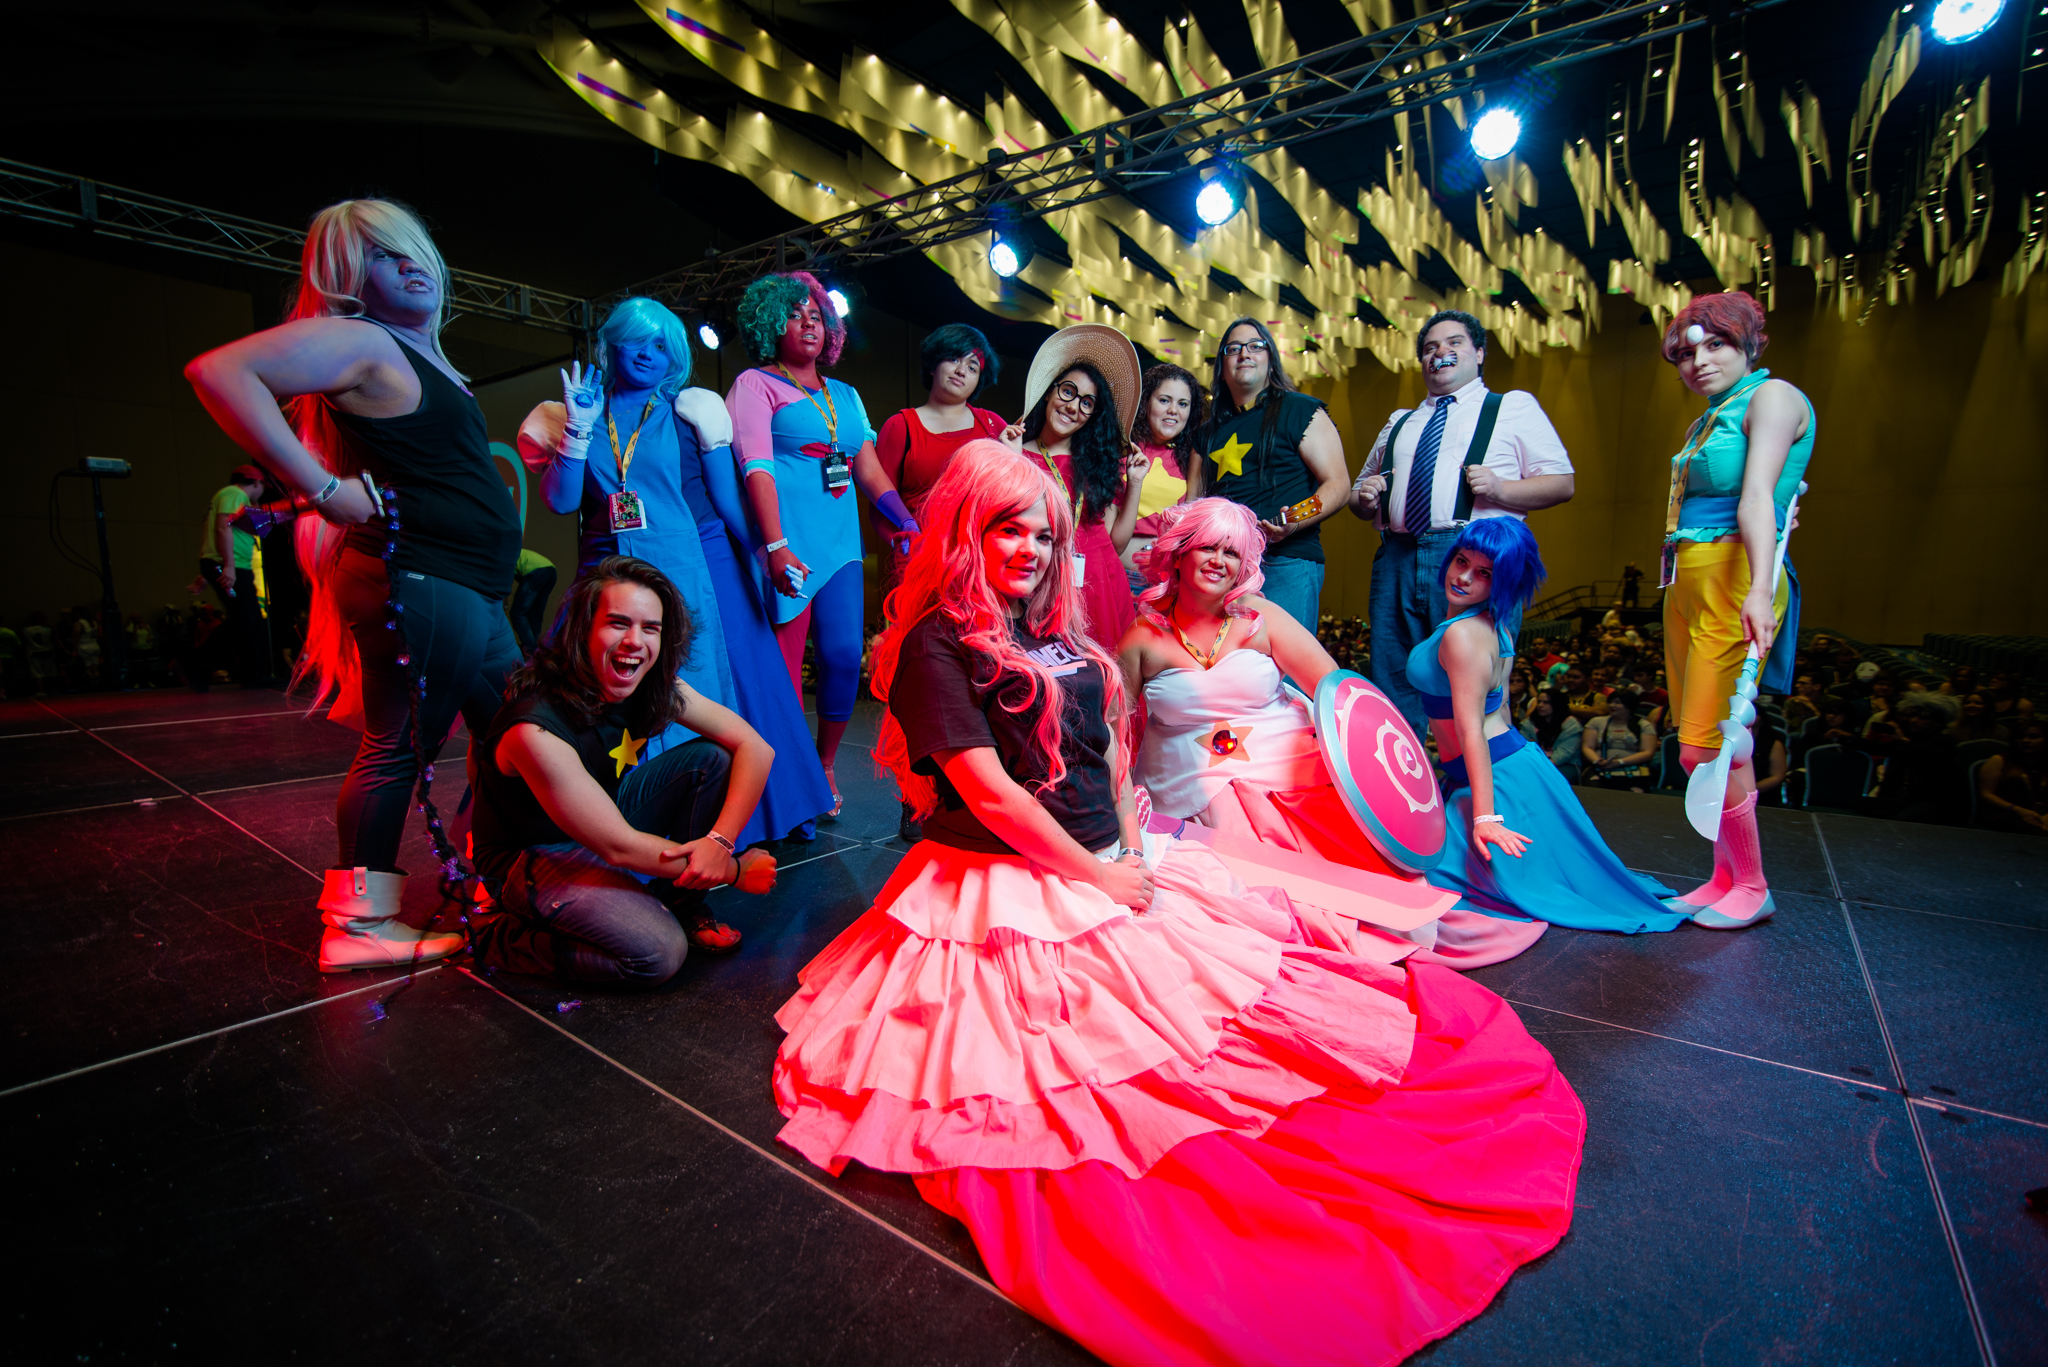 Cosplayers show their stuff at Puerto Rico Comic Con, the largest and most important entertainment event in the Caribbean region.